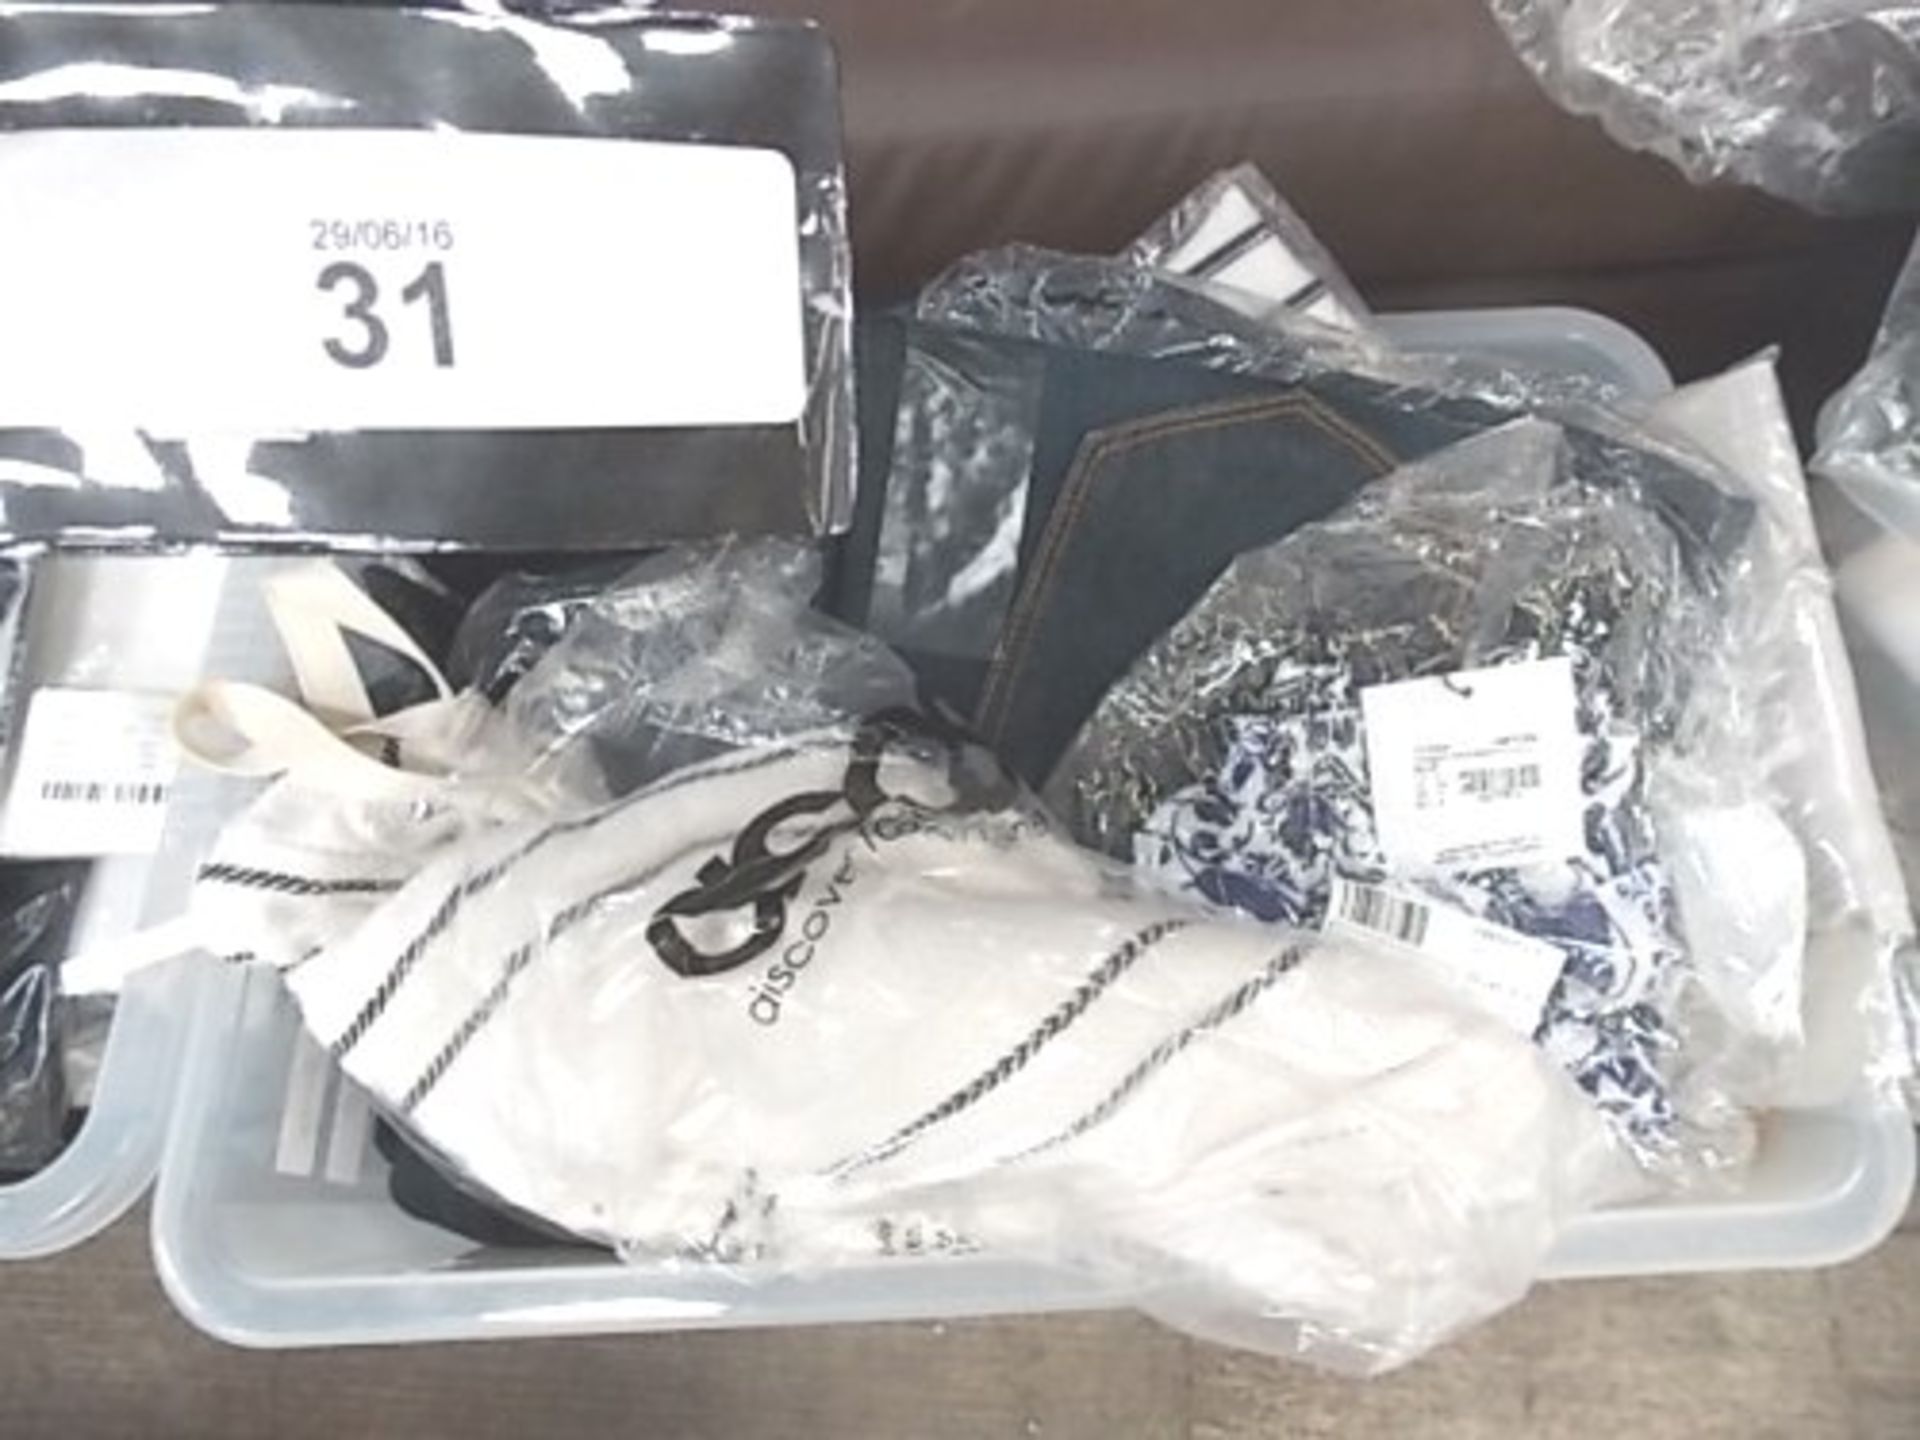 A good variety of trousers and jumpsuits - New (box not included)